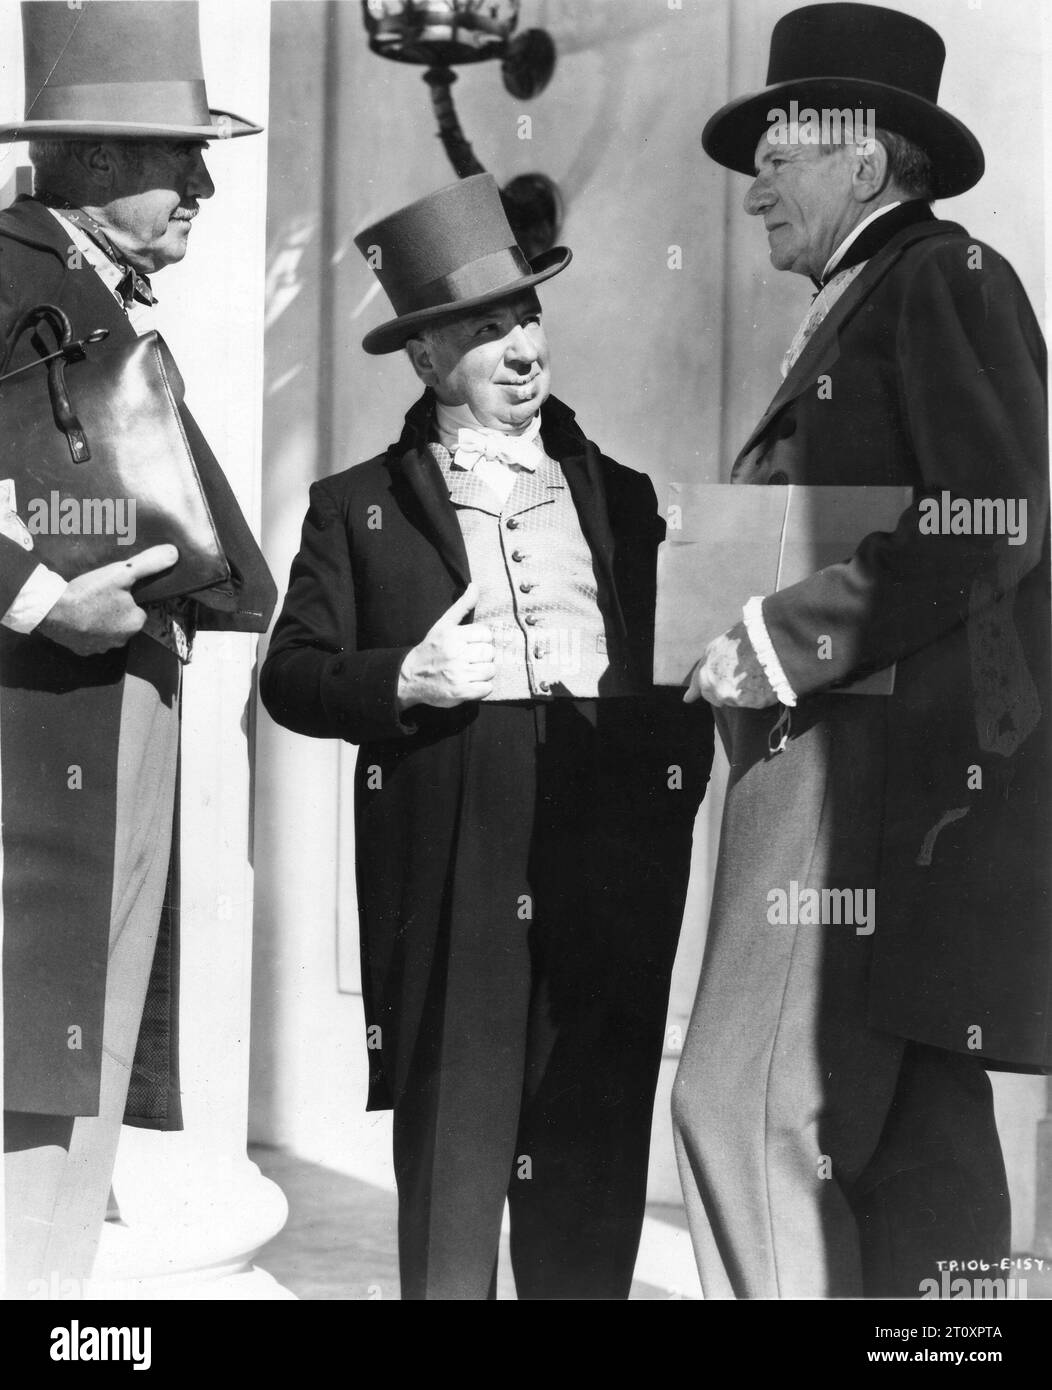 Director ALFRED HITCHCOCK in costume for his cameo appearance as an Australian dandy in UNDER CAPRICORN 1949 Costume Design ROGER FURSE Transatlantic / Warner Brothers Stock Photo